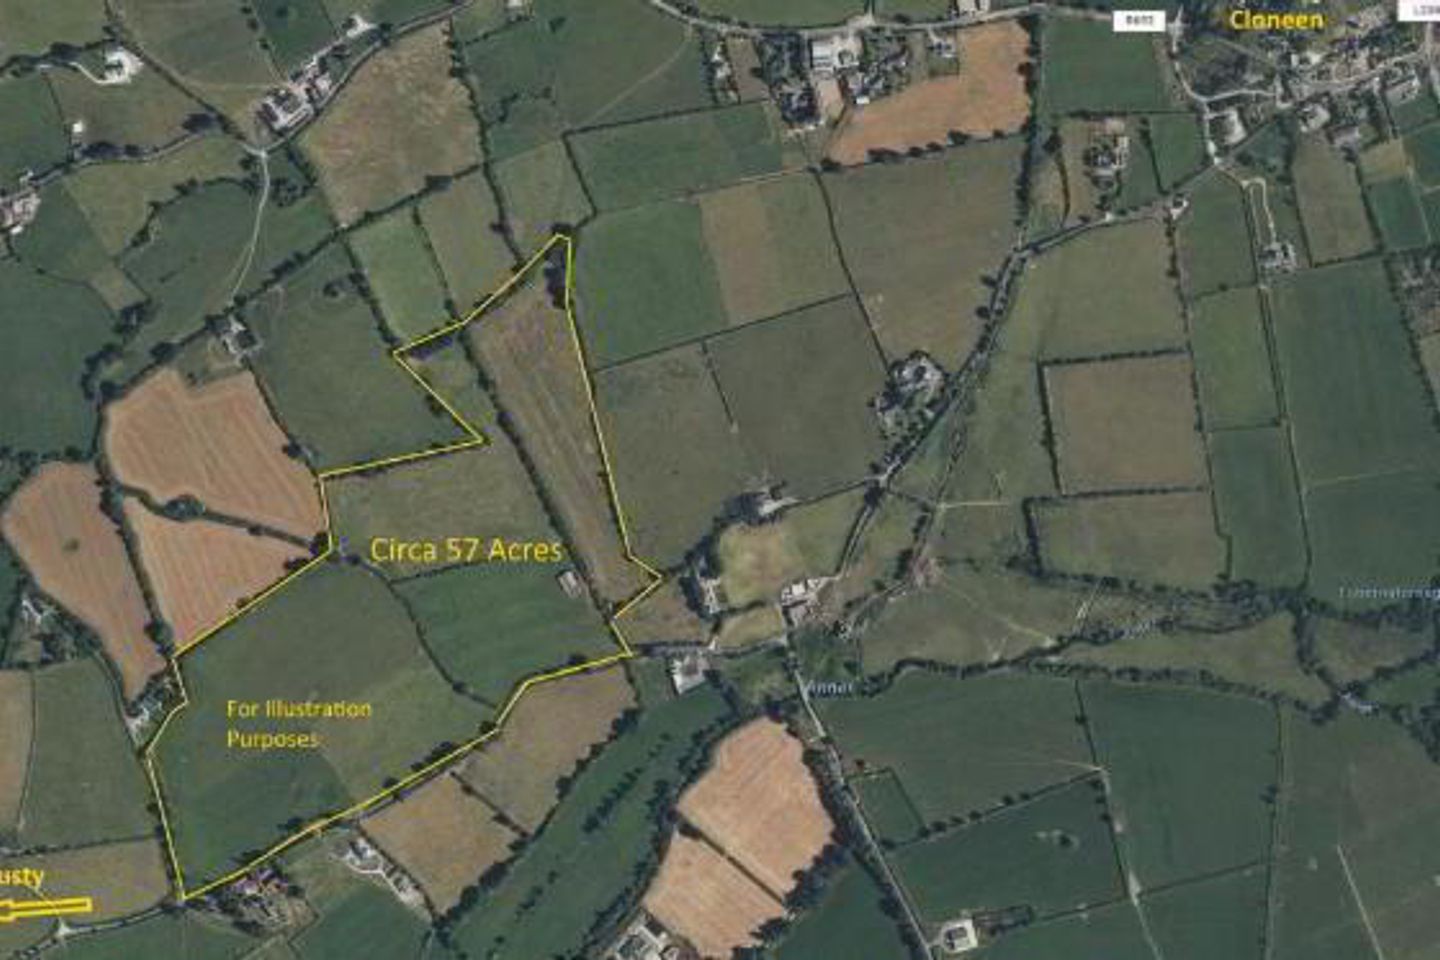 Circa 57 Acres,22.98 Hectares At Milestown, Cloneen, Co. Tipperary